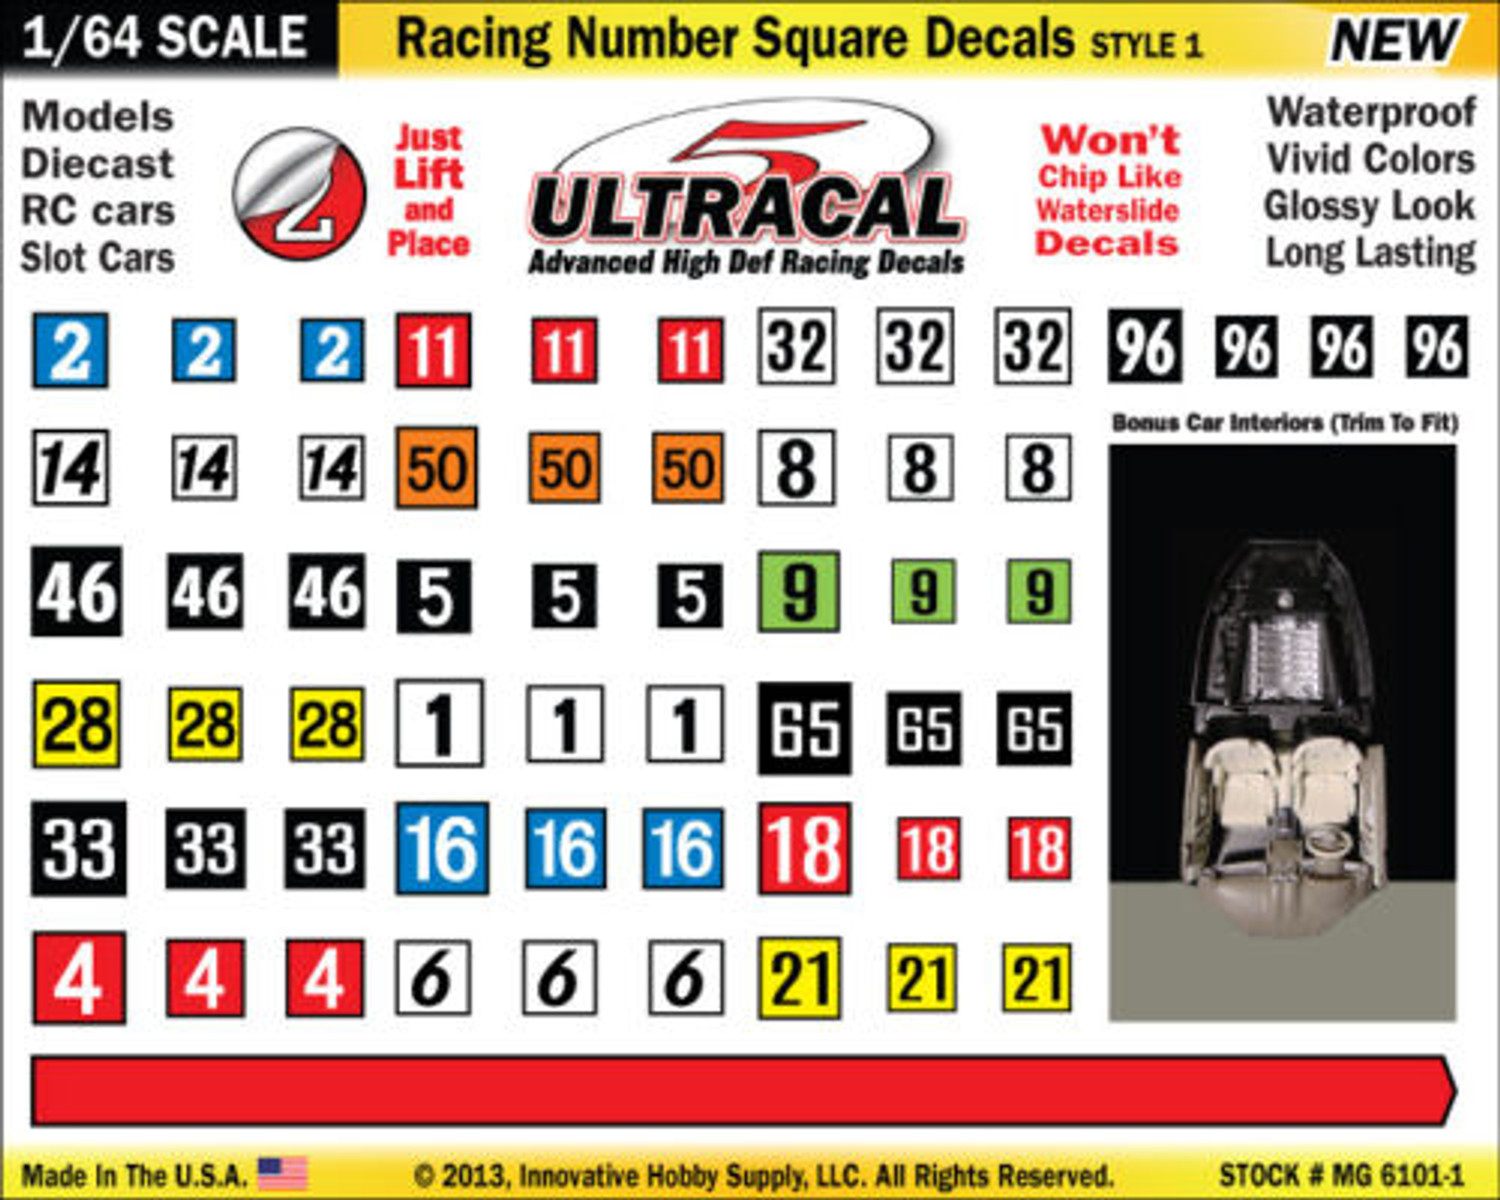 MG 6101-1 Ultracal Racing Number Square Decals Style 1 1:64 Scale